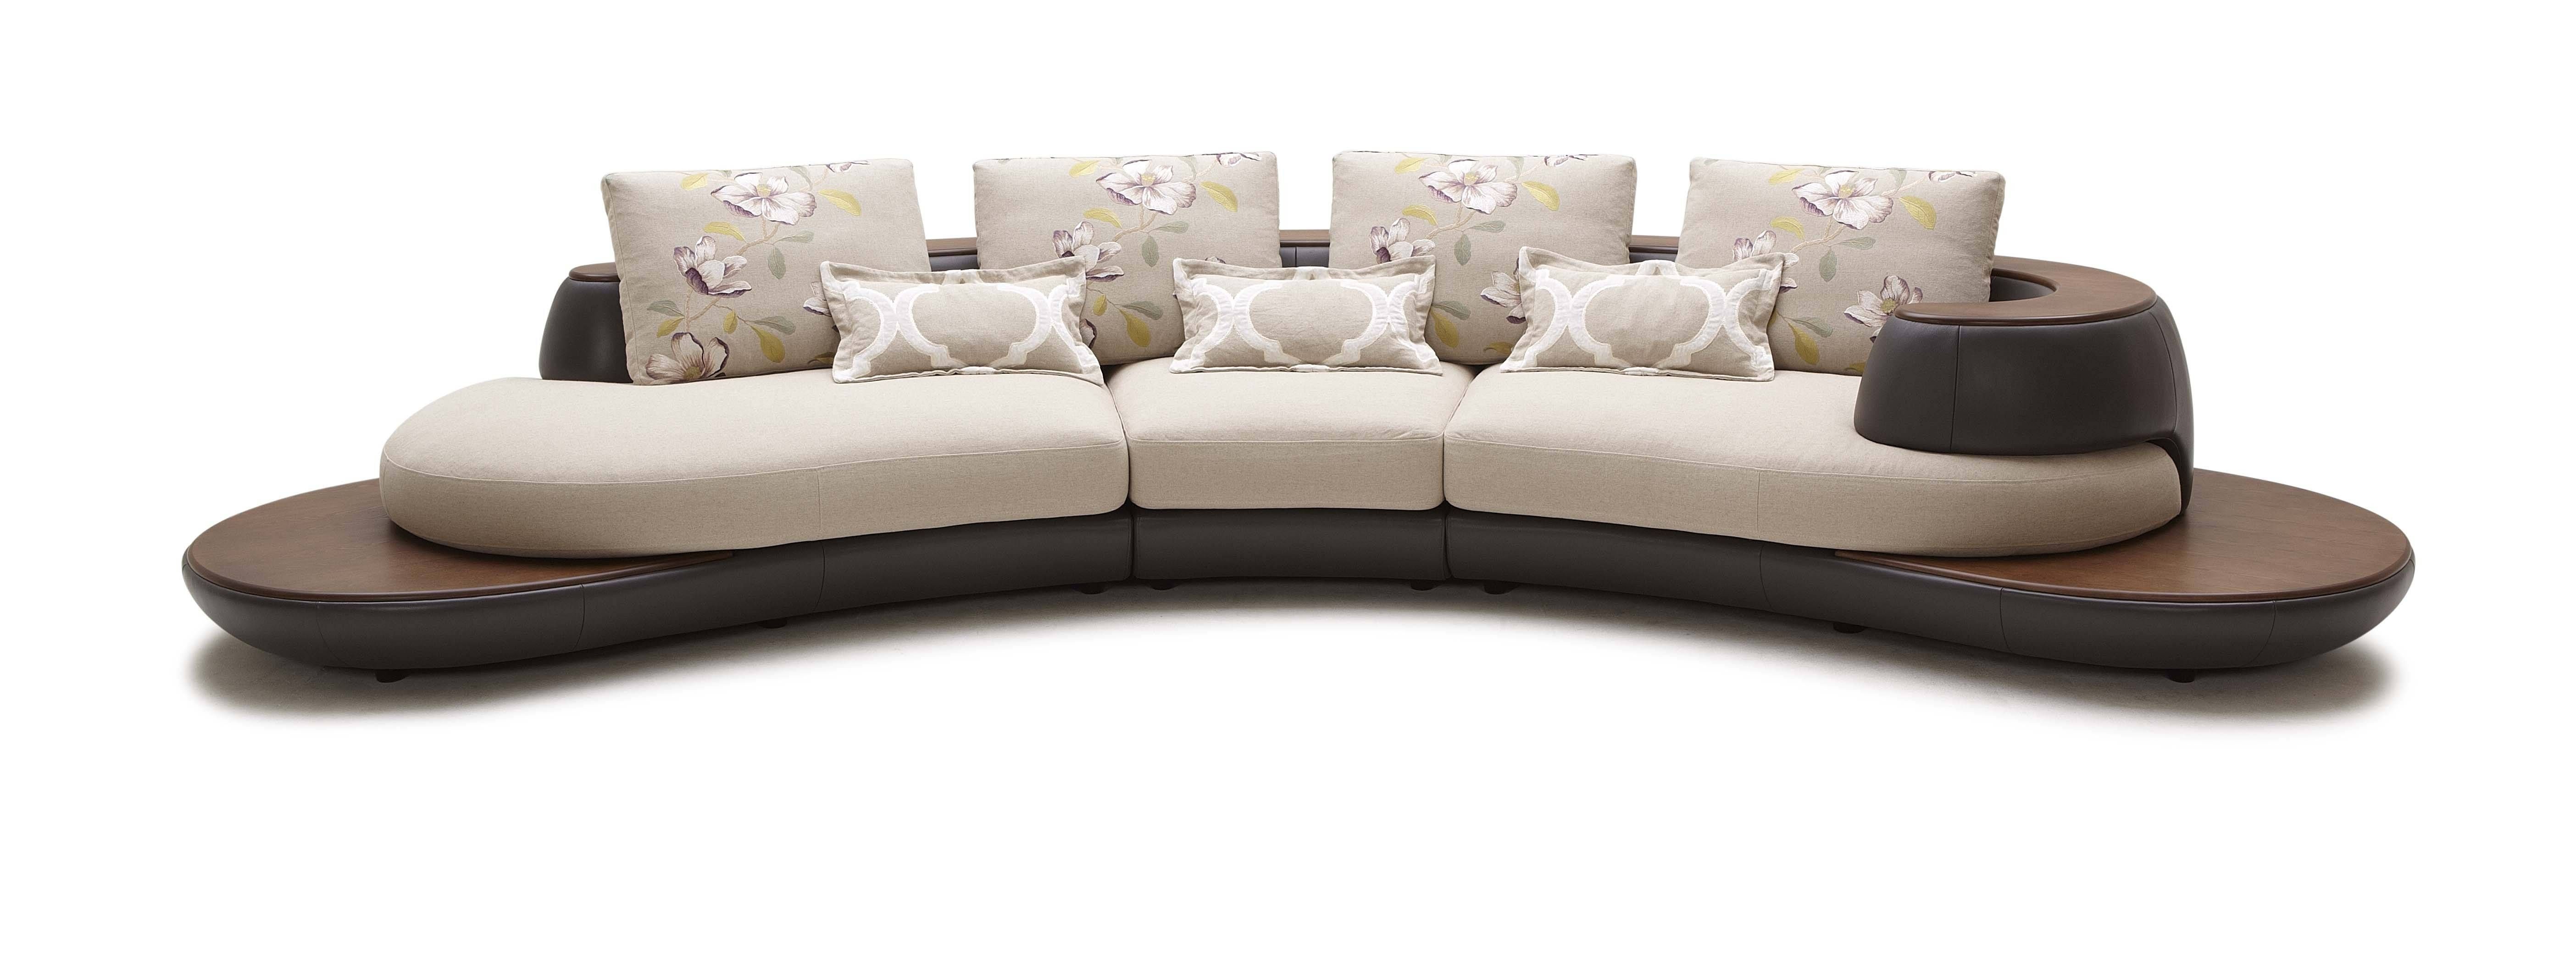 Elegant Fabric Sectional Sofas With Chaise 74 About Remodel Camo Intended For Elegant Fabric Sofas (Photo 25 of 30)